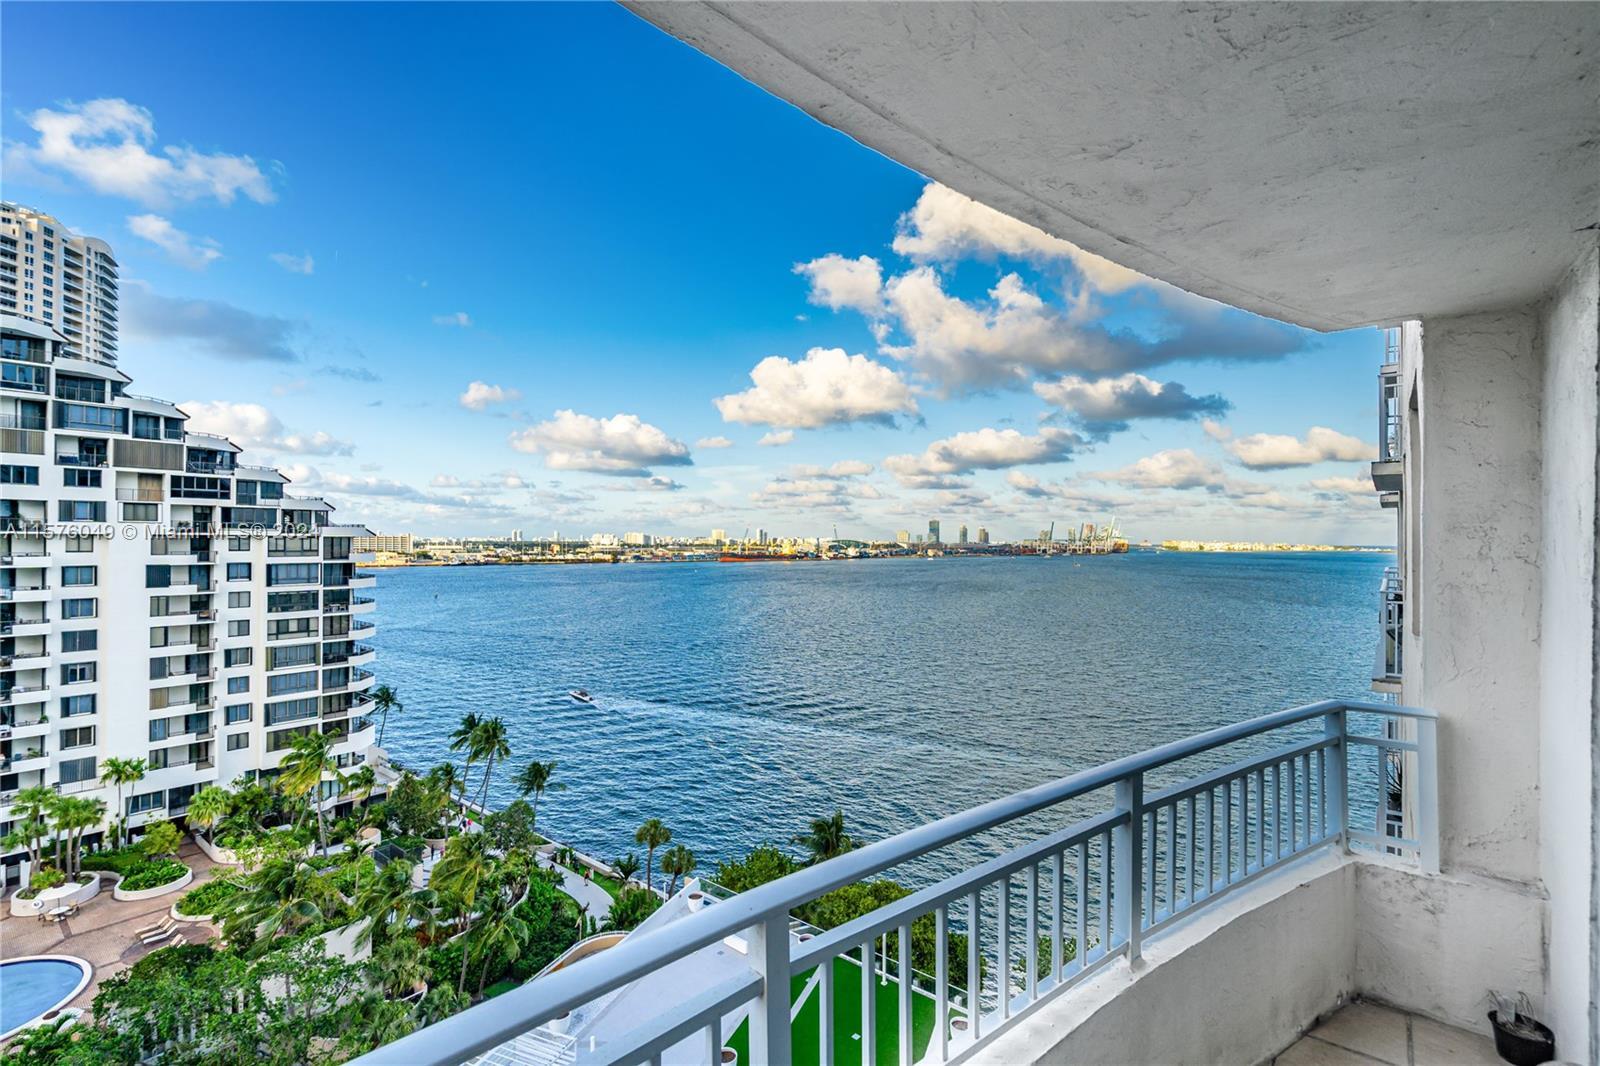 Nestled in the sought-after Brickell Key, this one-bedroom, one-bath condo is an oasis of tranquilit